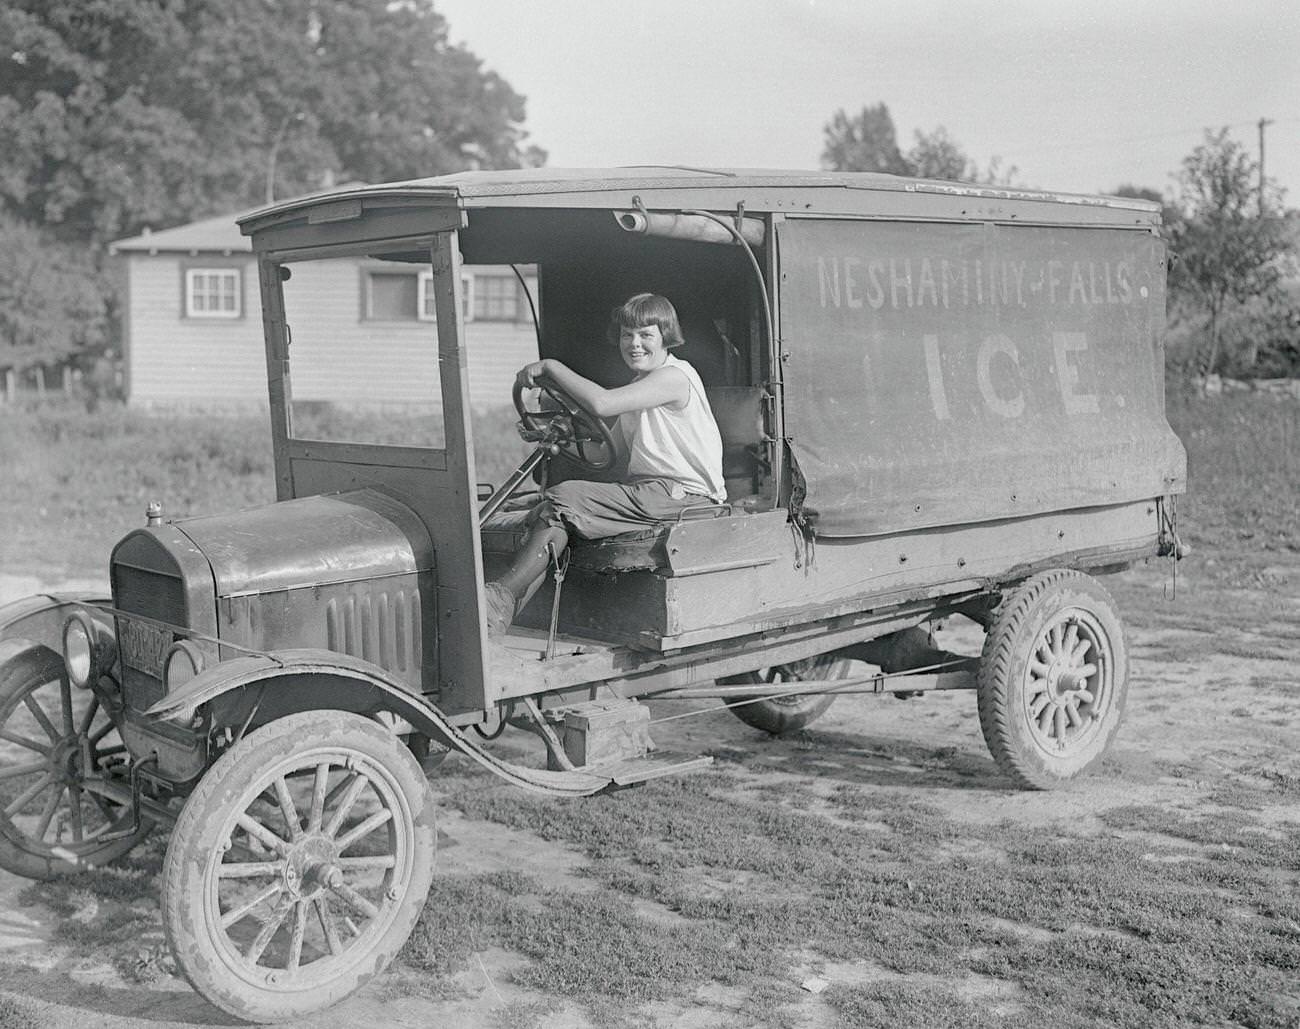 Peggy "Red" Nuneviller, Ice Truck Driver, 1920s